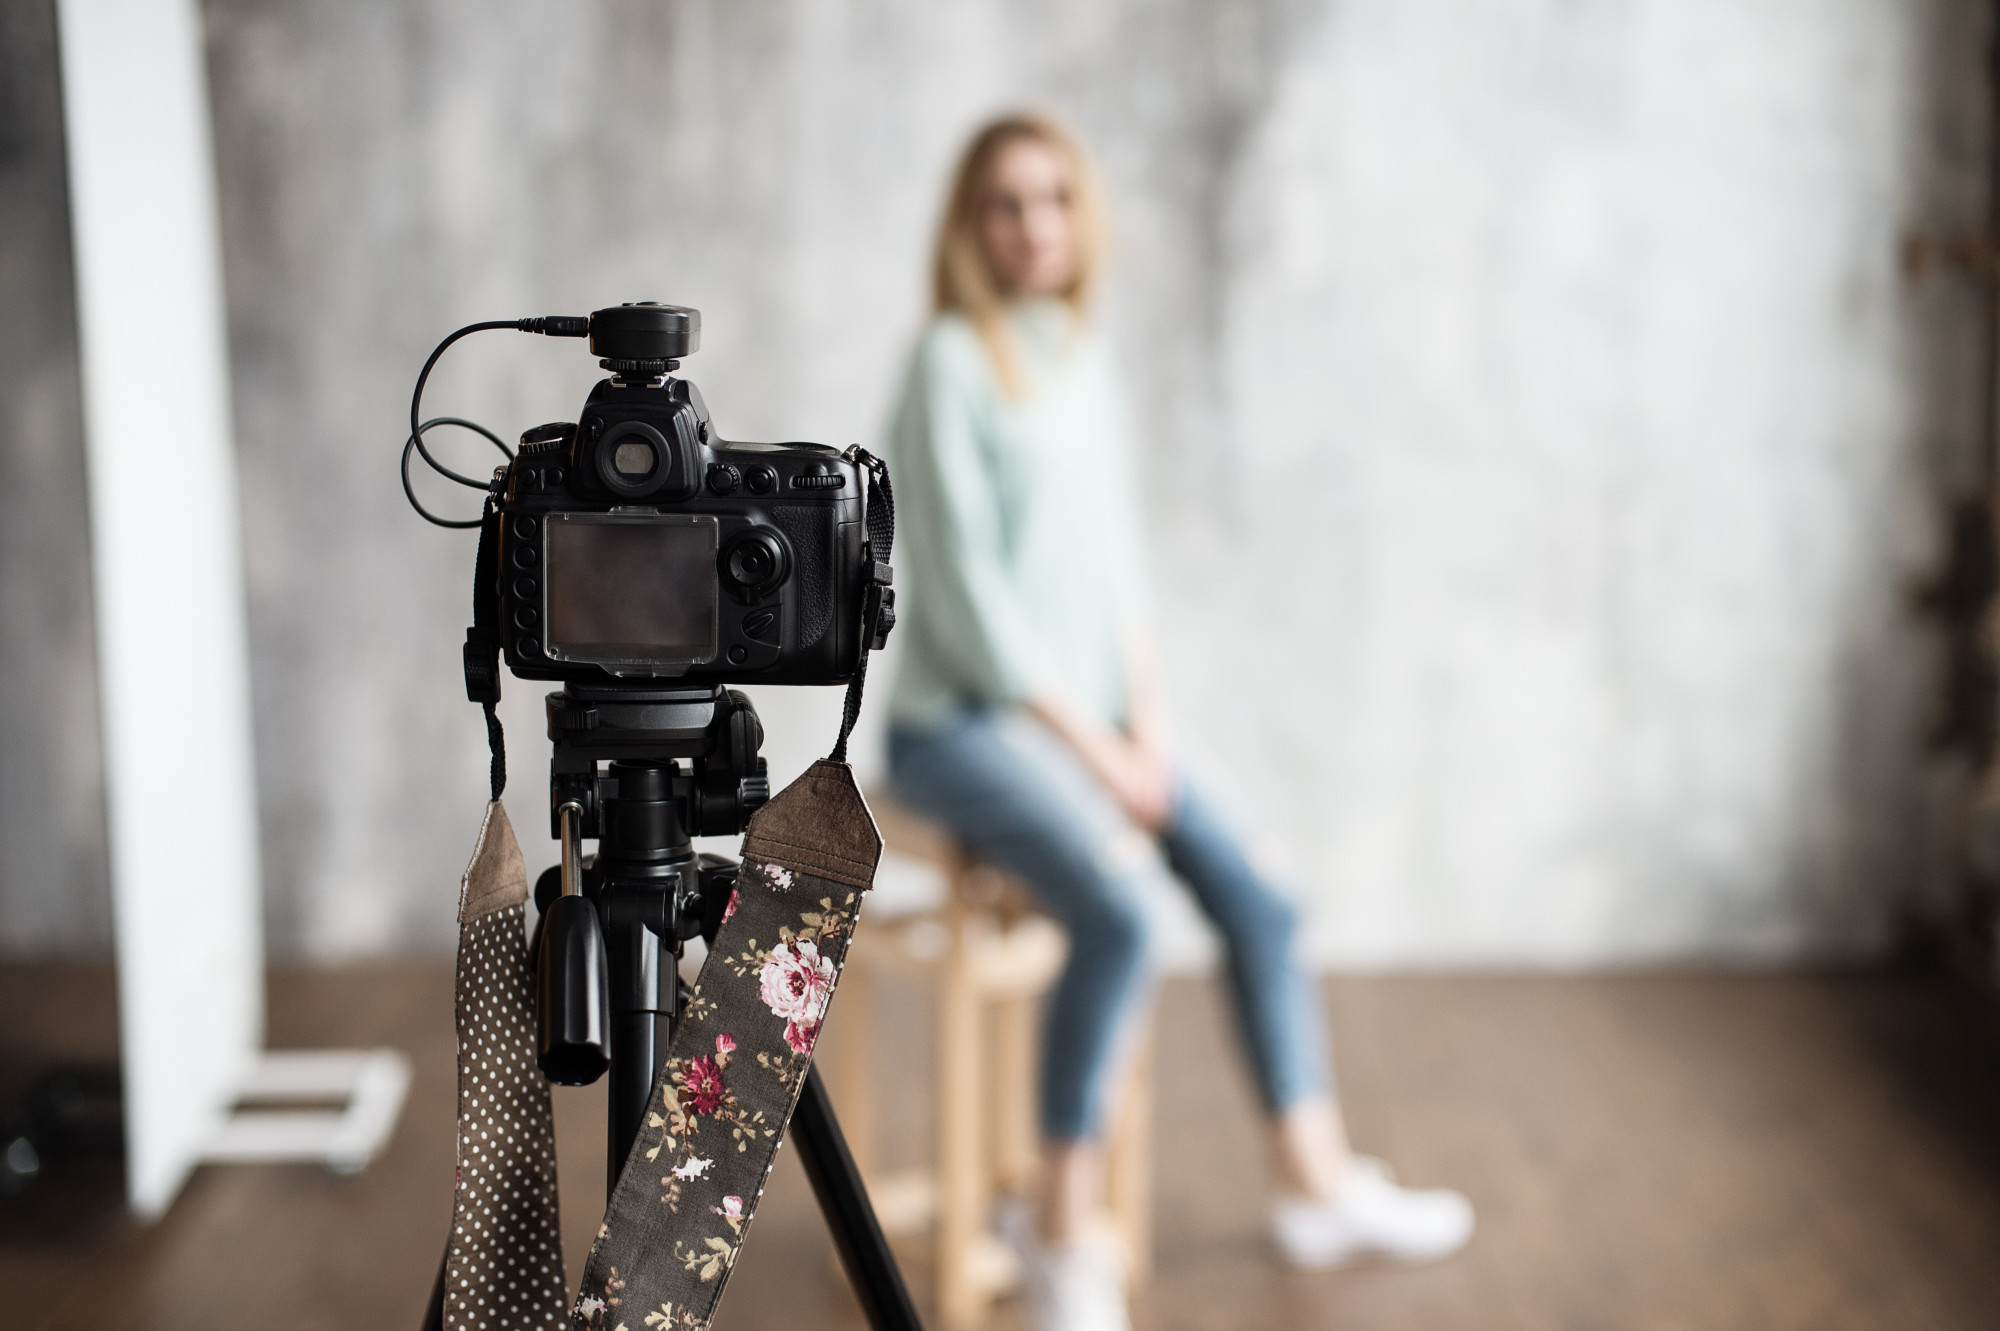 Adobe Stock royalty-free image #188453724, 'photo shooting backstage' uploaded by allasimacheva, standard license purchased from https://stock.adobe.com/images/download/188453724; file retrieved on April 10th, 2019. License details available at https://stock.adobe.com/license-terms - image is licensed under the Adobe Stock Standard License